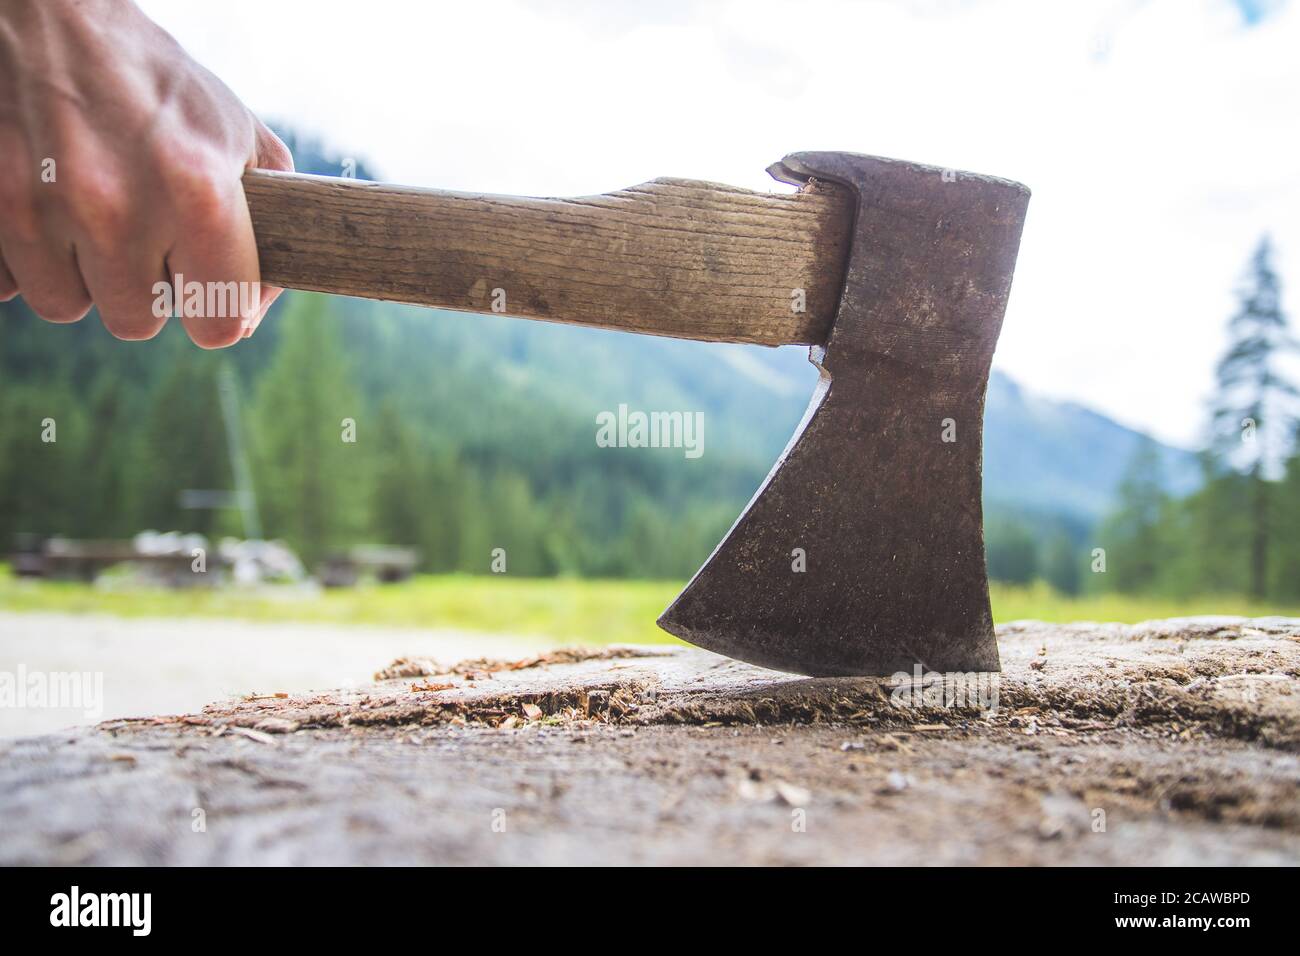 https://c8.alamy.com/comp/2CAWBPD/close-up-of-old-male-hand-holding-axe-attached-to-a-tree-trunk-countryside-2CAWBPD.jpg